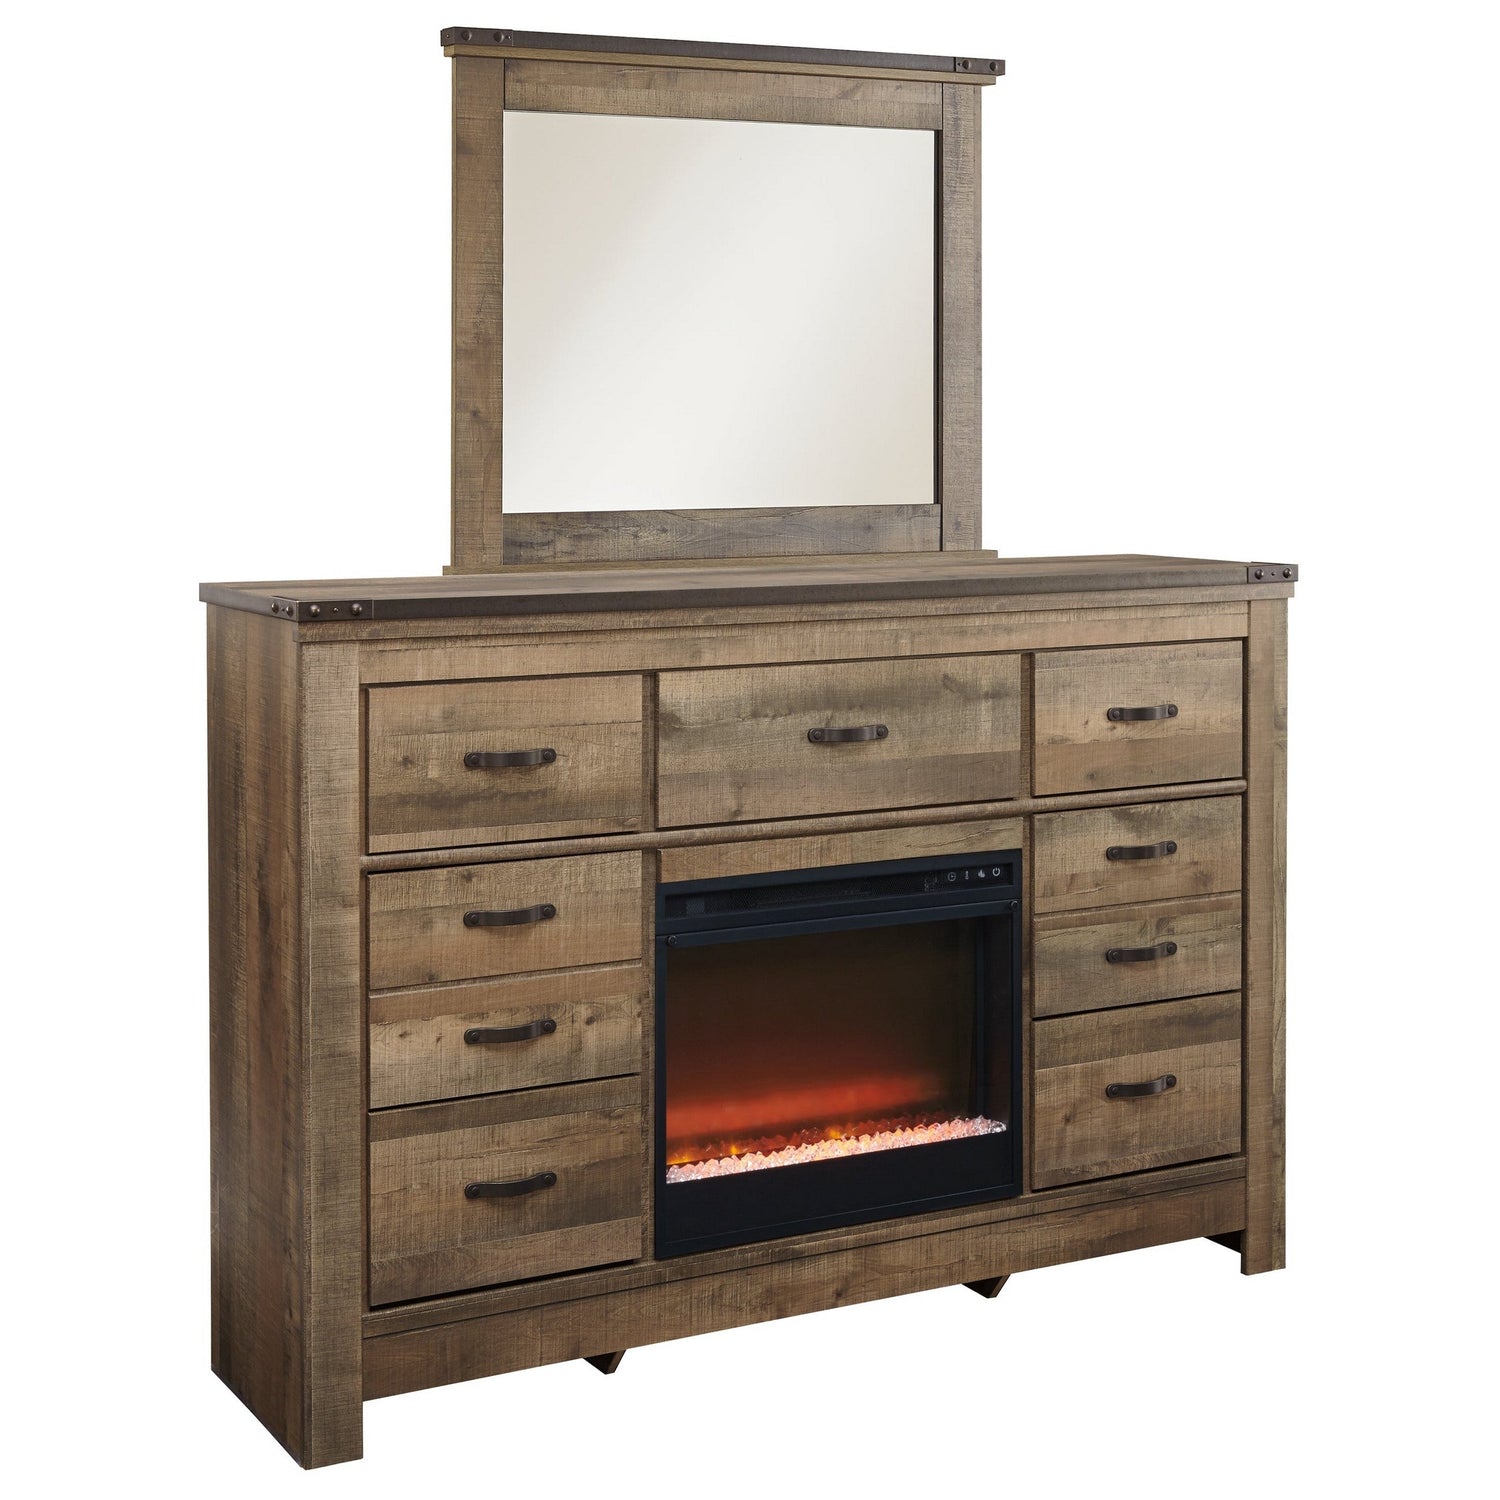 Trinell Dresser and Mirror with Fireplace Ash-B446B53